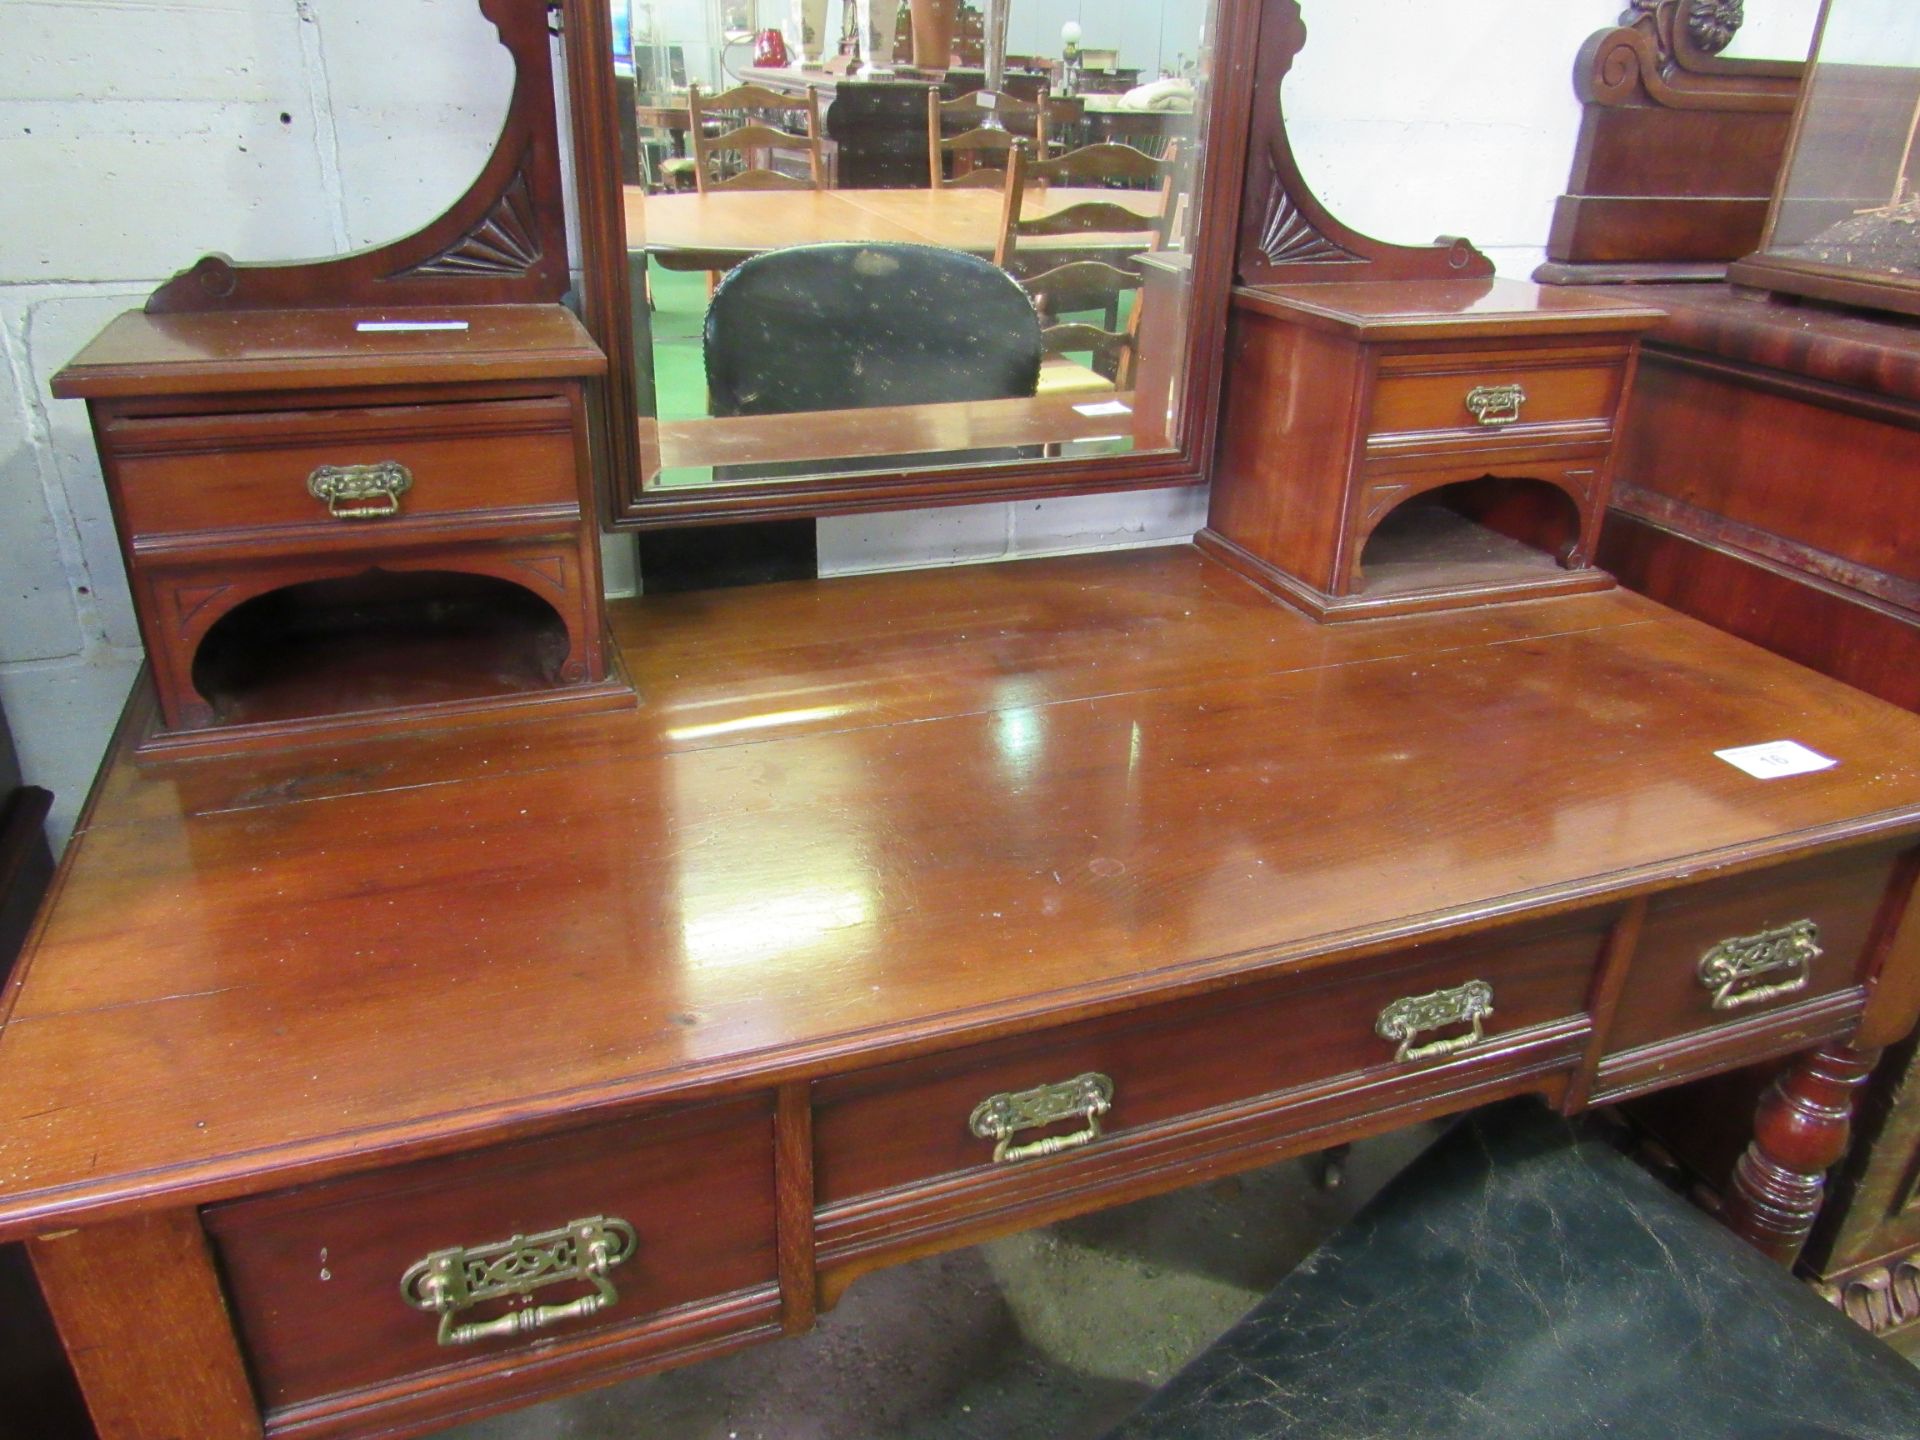 Mahogany dressing table with three frieze drawers, mirror flanked by two small cabinets, turned legs - Image 2 of 4